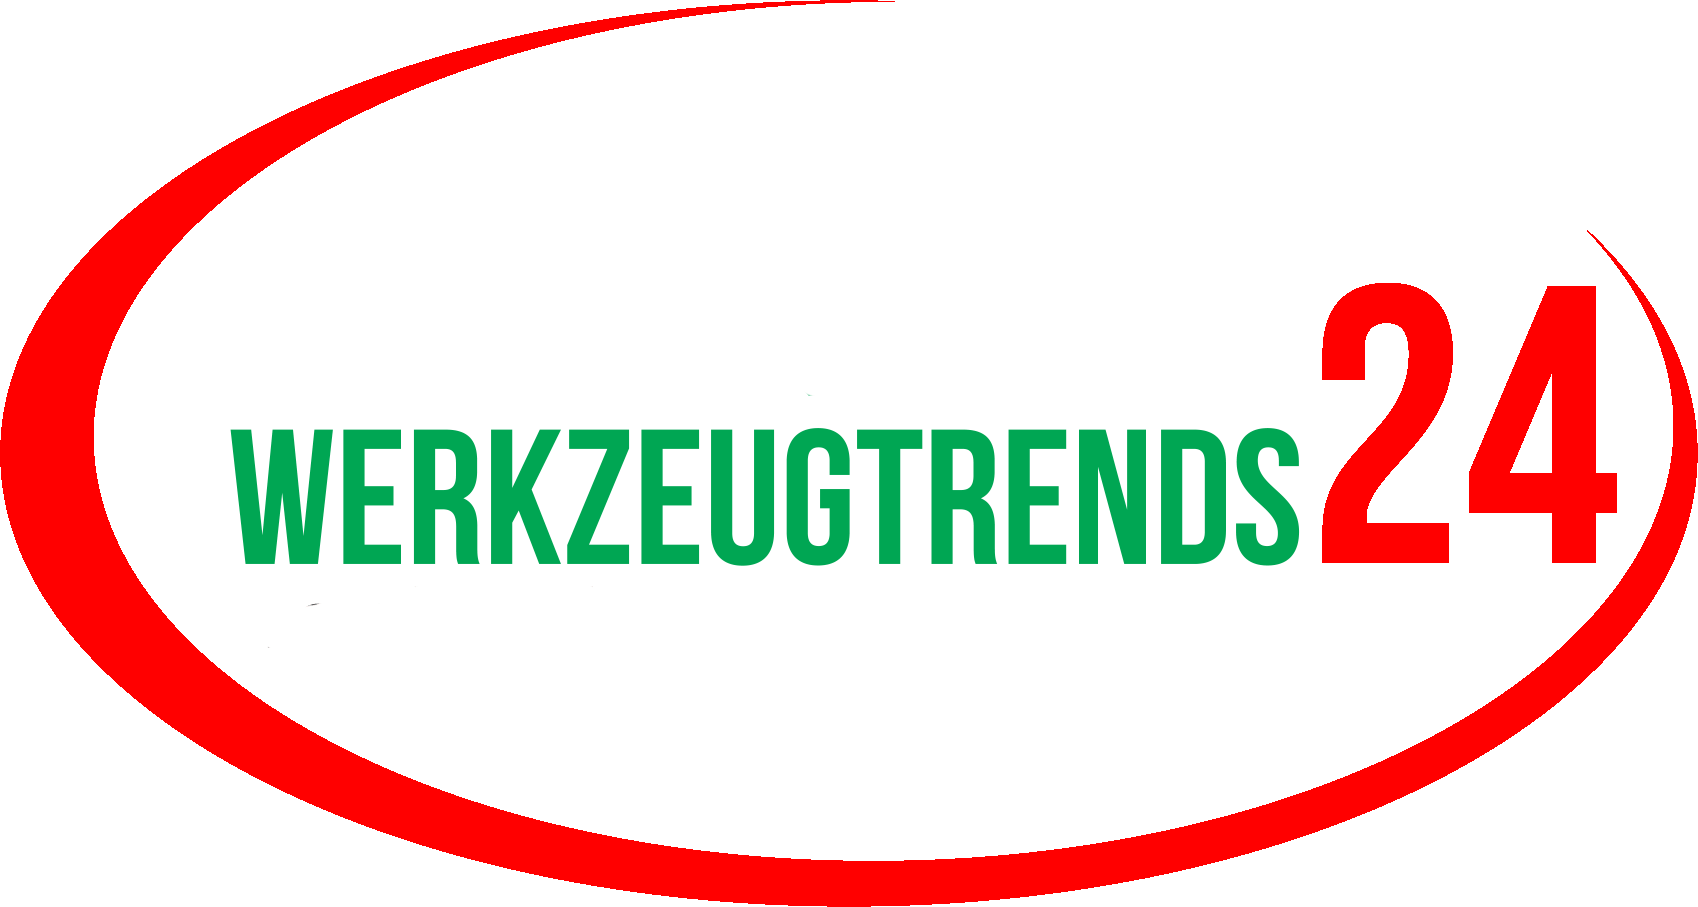 WERKZEUGTRENDS-green-and-brawn-color-logo.png(1) copy 1